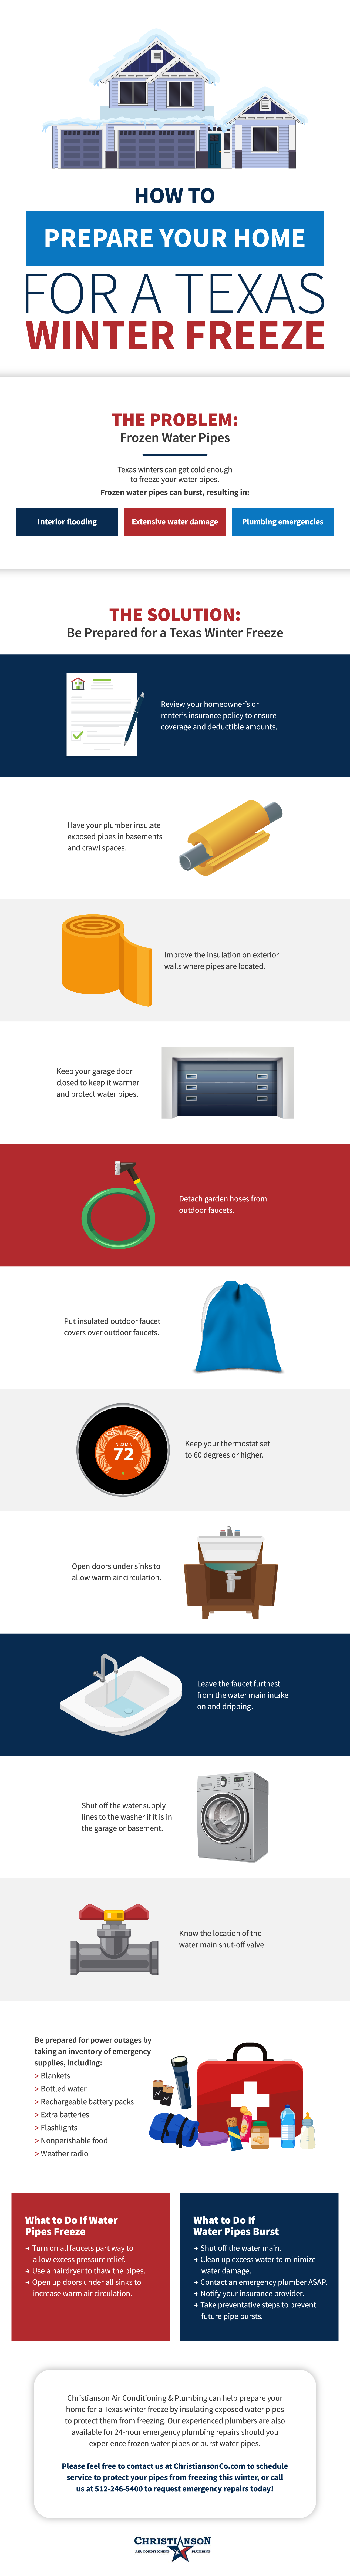 Preparing Your Texas Home for a Winter Freeze Infographic